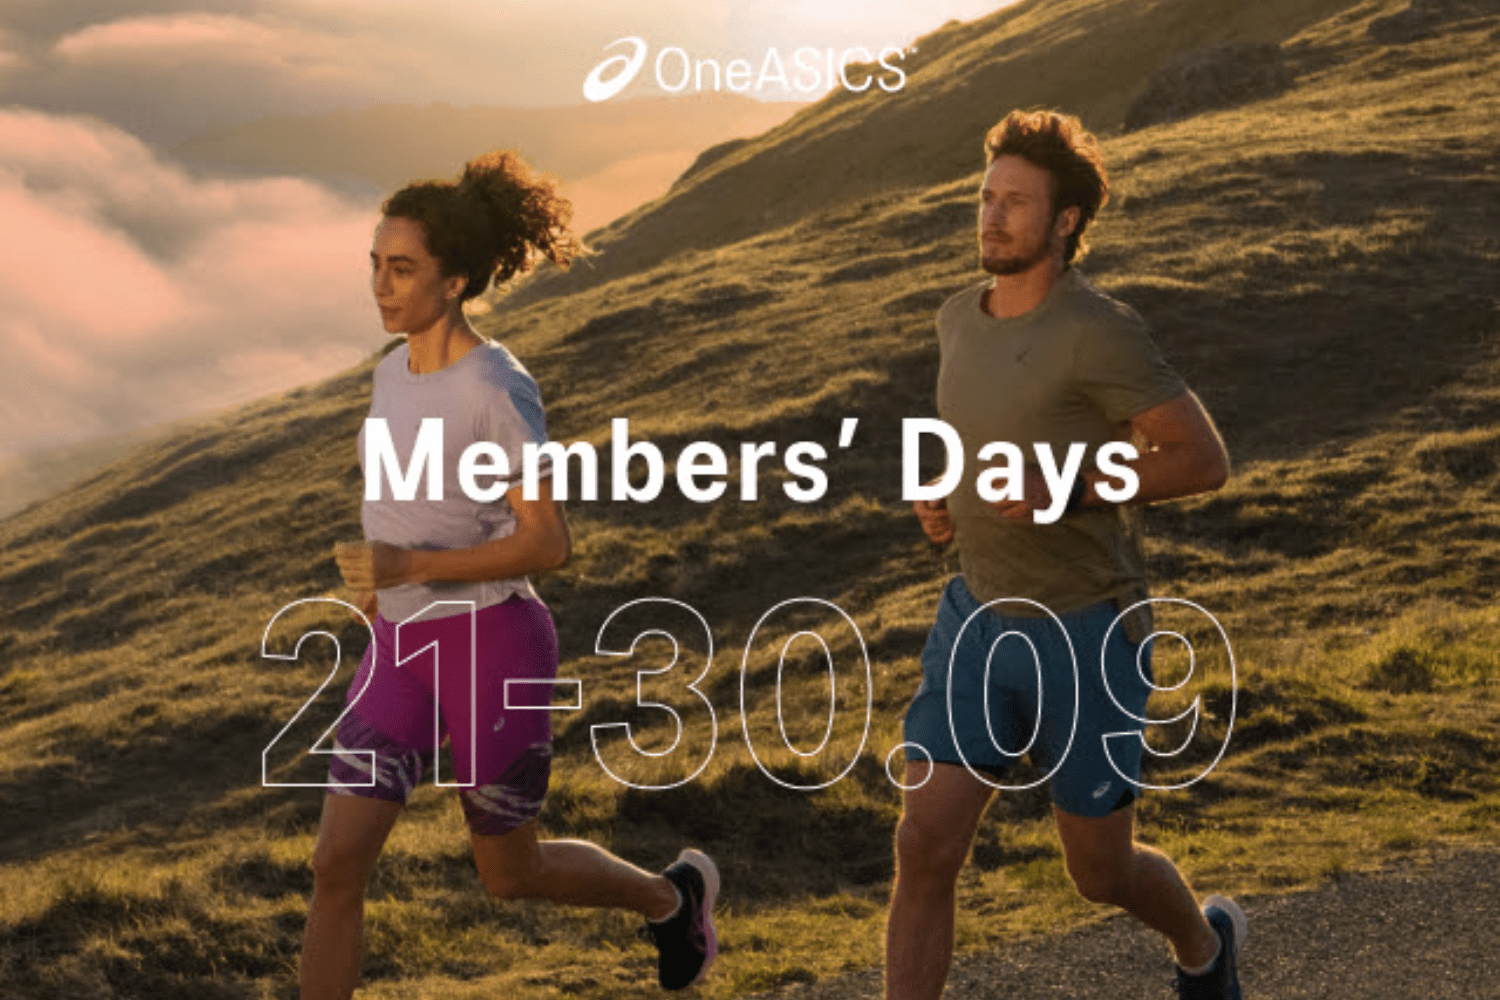 The ASICS Member Days offer high discounts and much more